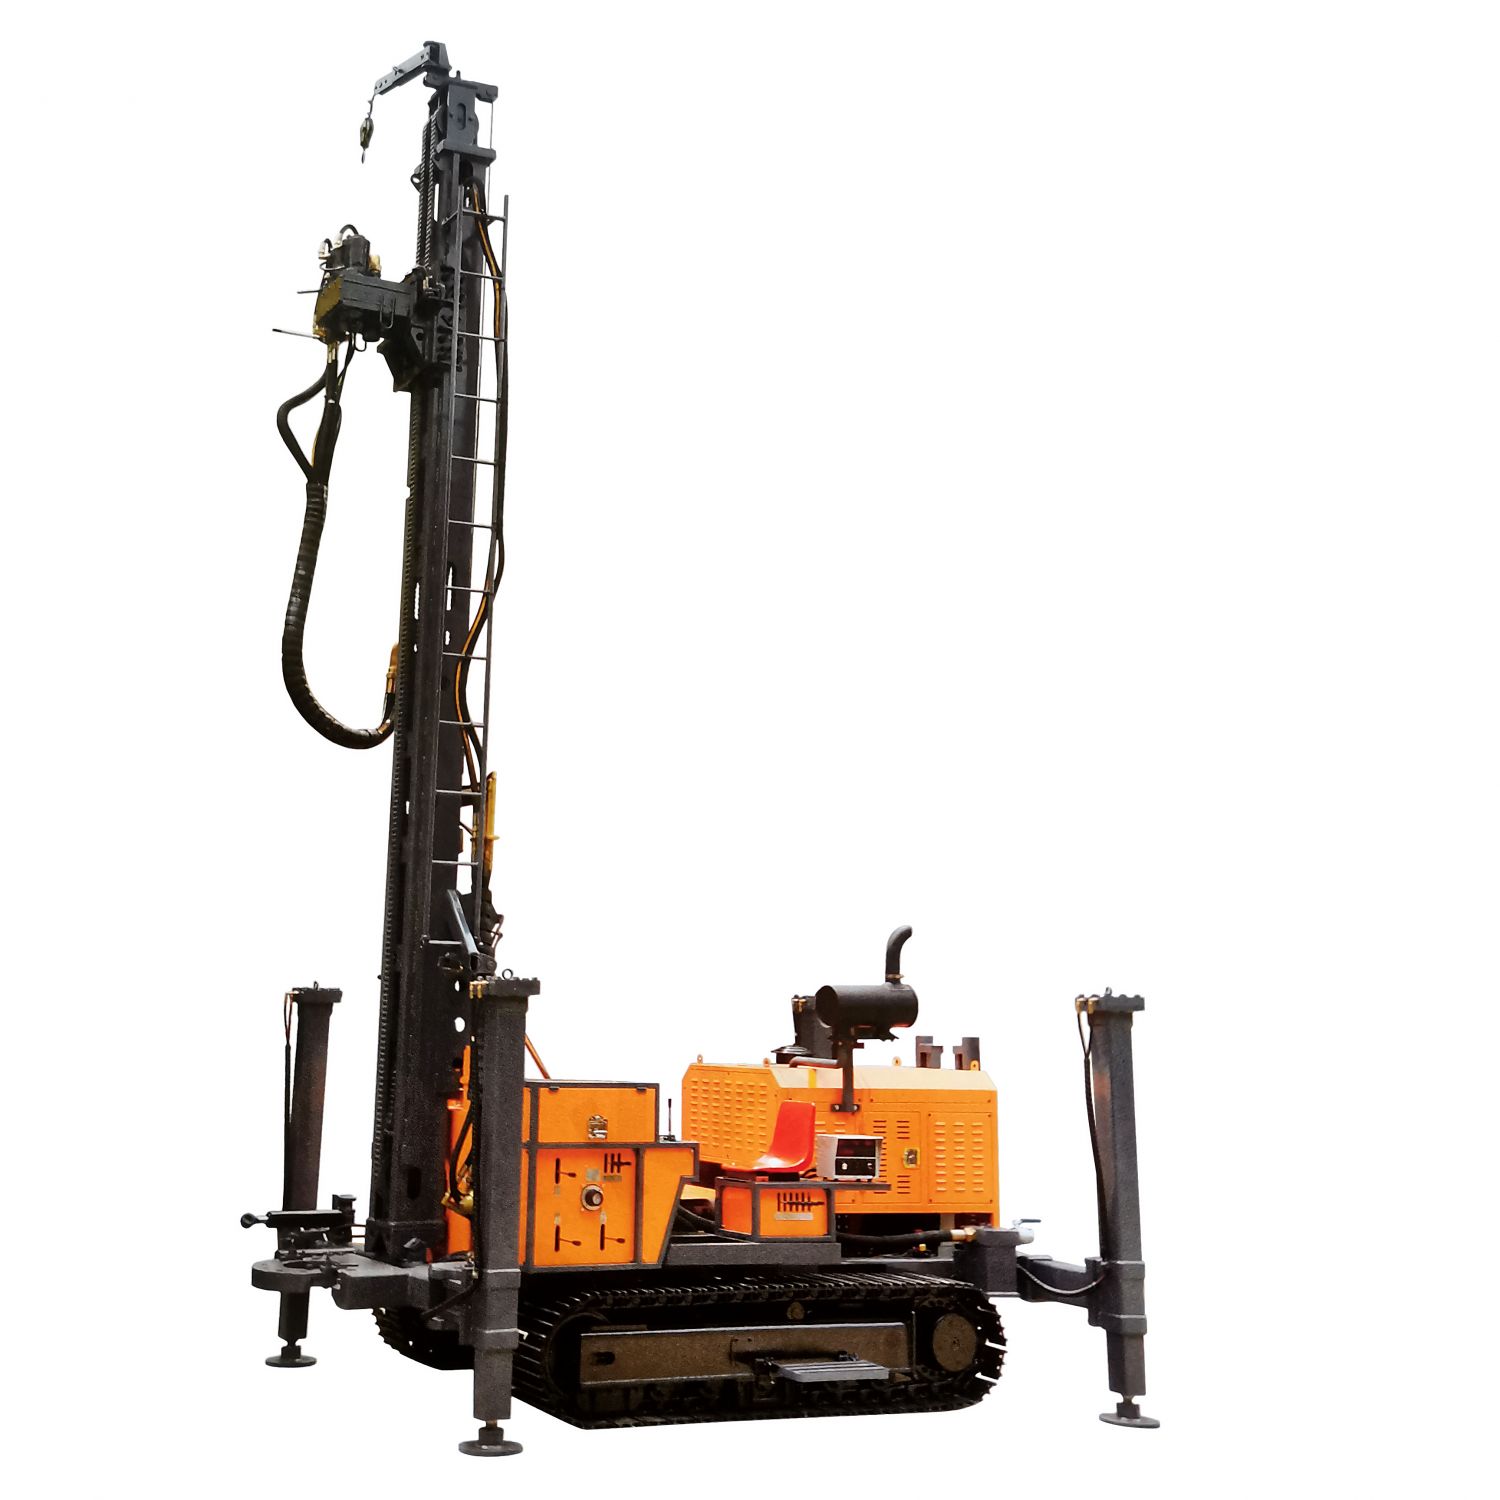 KW600/YCW600 Geothermal Water Well Multifunction Drilling Rig